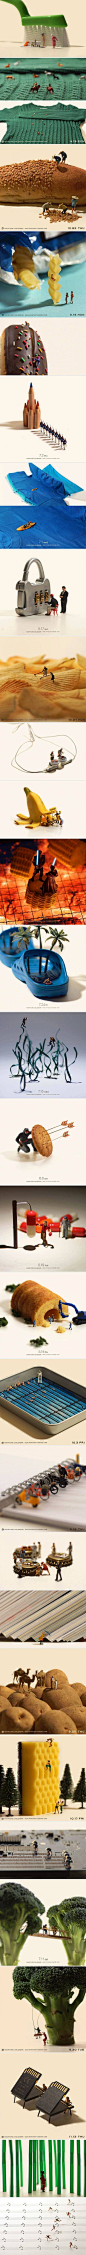 Tiny figurines interacting with everyday objects in interesting ways (By Miniature Calendar): 